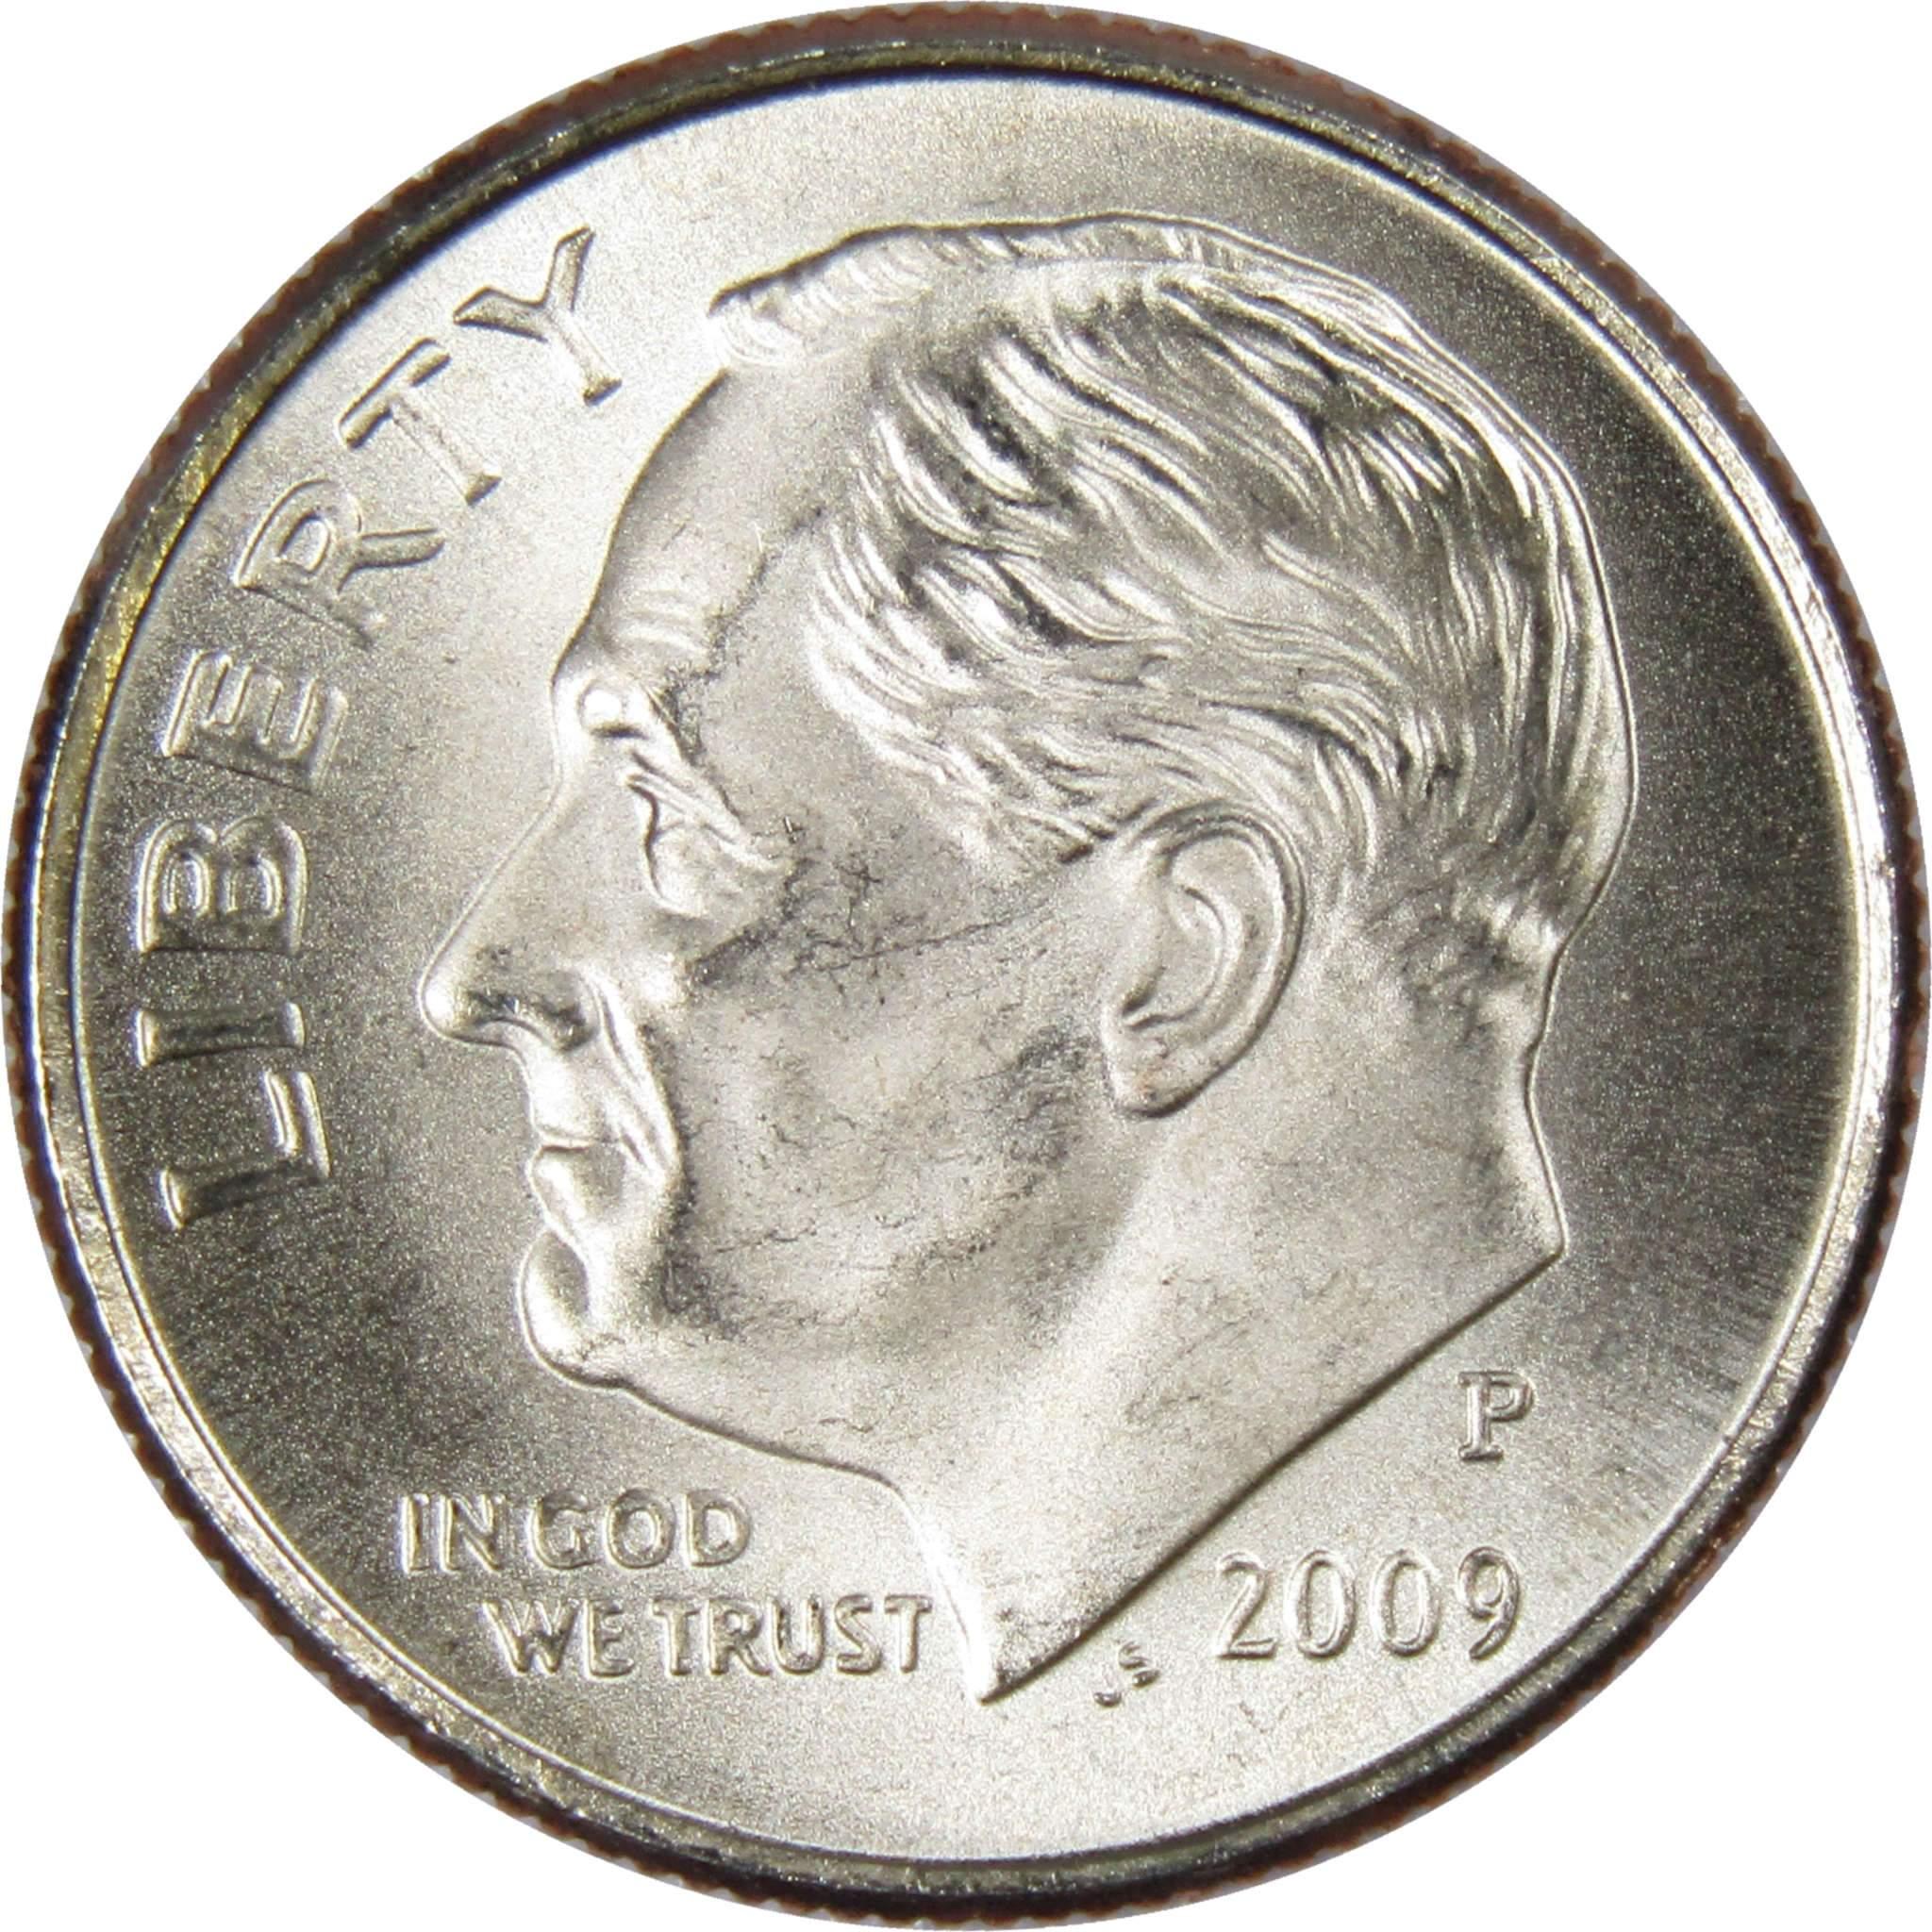 2009 P Roosevelt Dime BU Uncirculated Mint State 10c US Coin Collectible